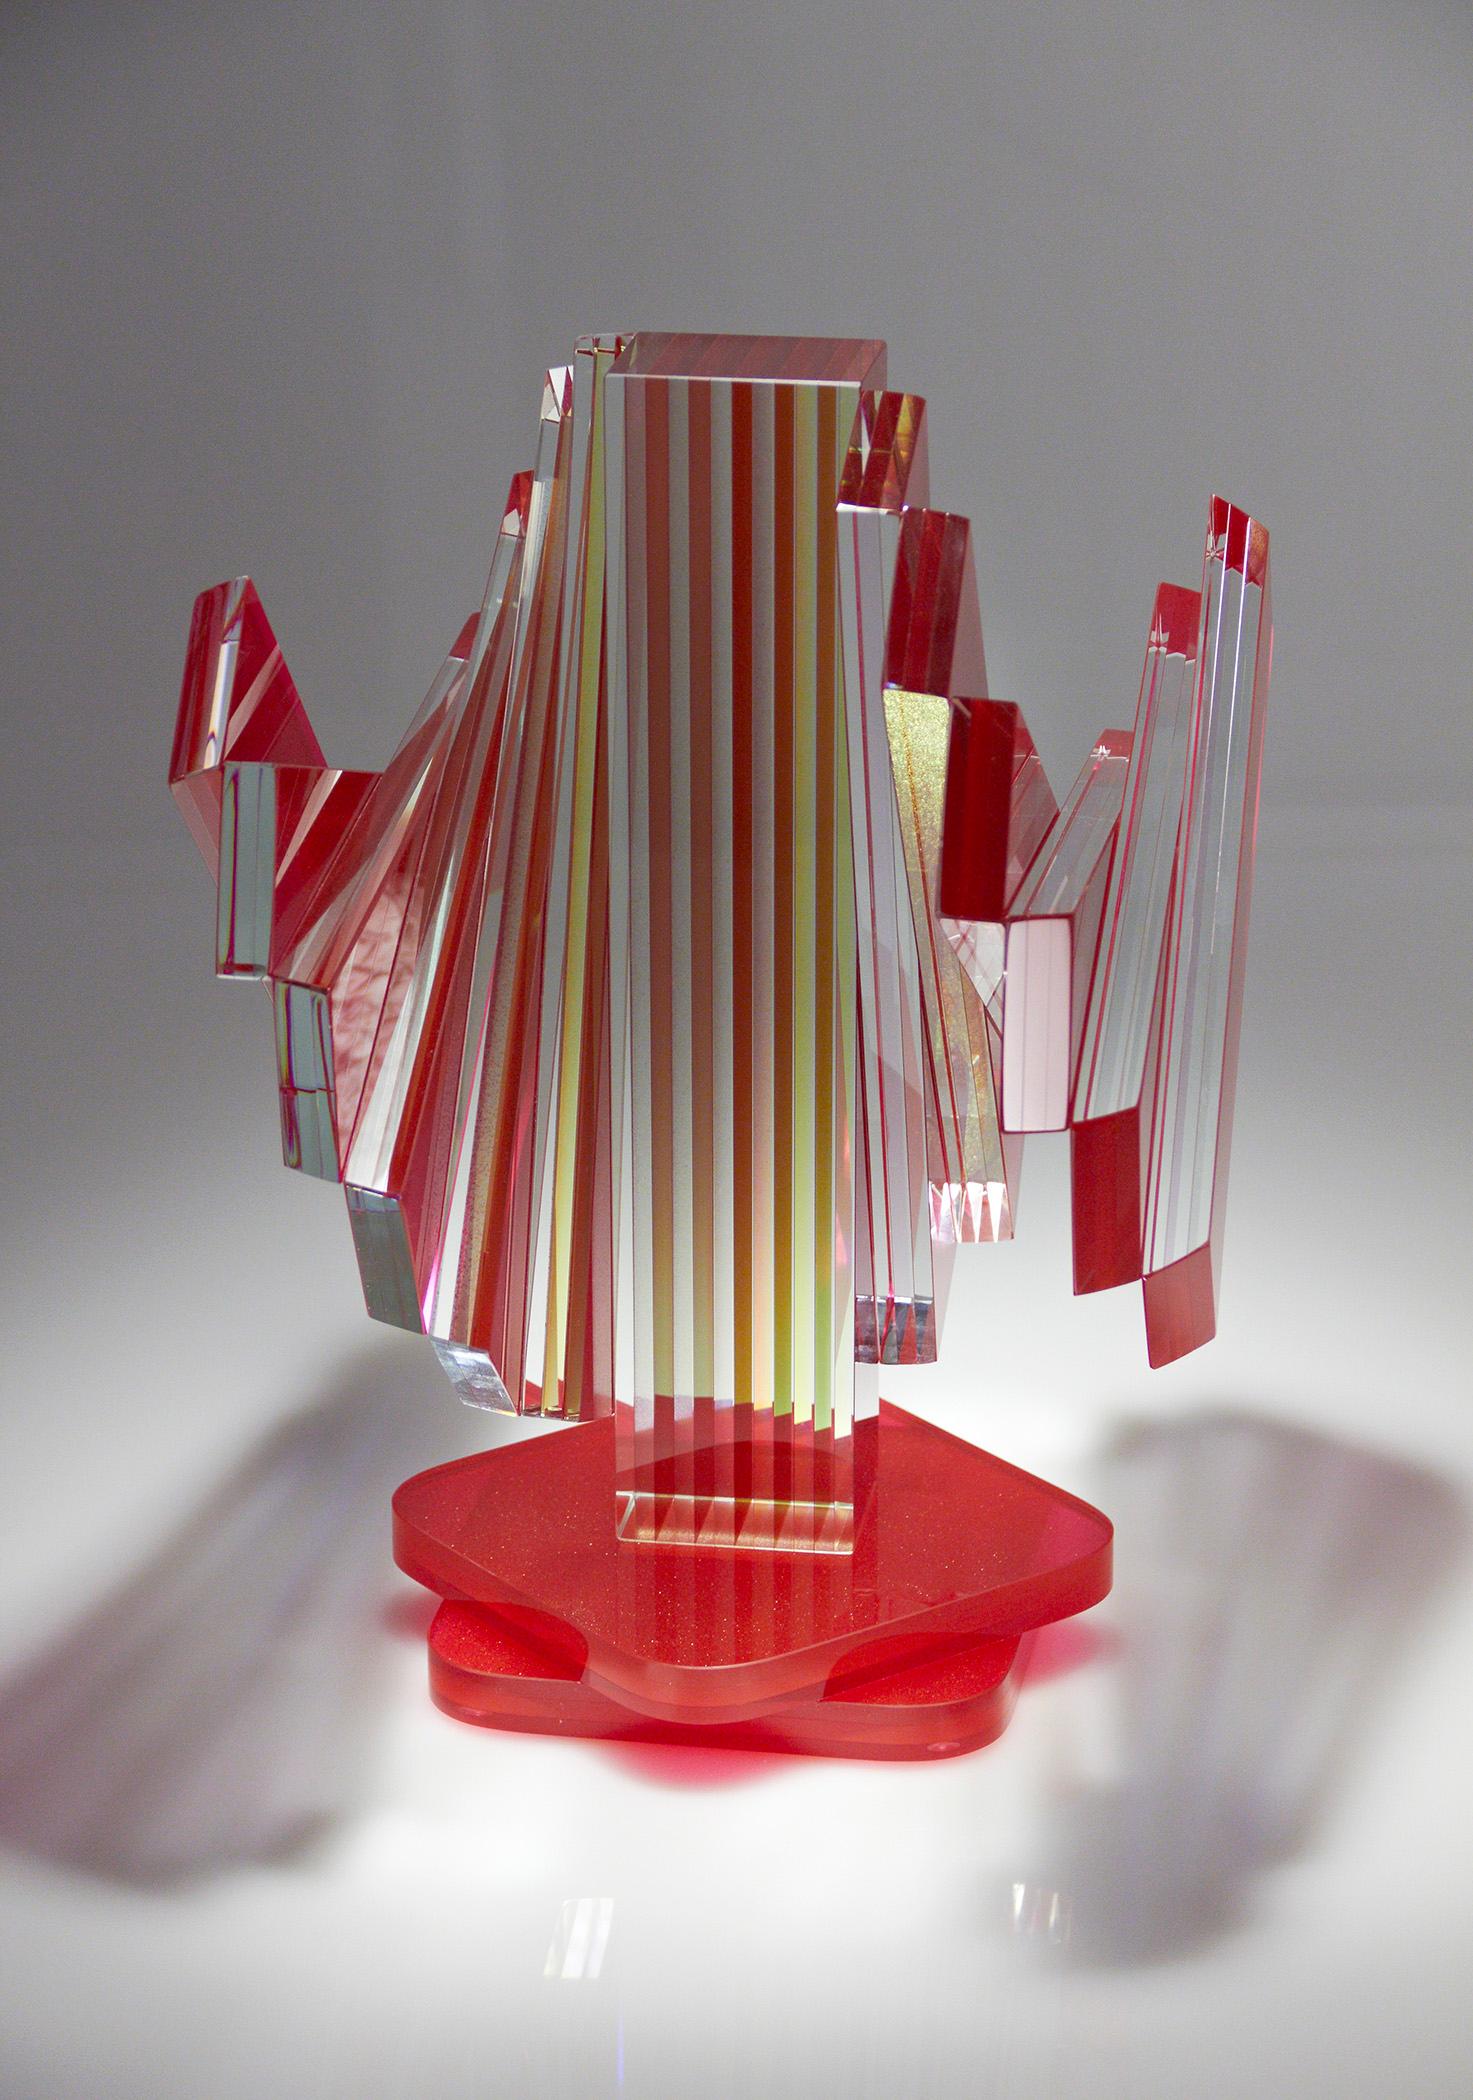 Red and Gold Plate Glass Contemporary Tabletop Sculpture im Zustand „Neu“ im Angebot in Waltham, MA